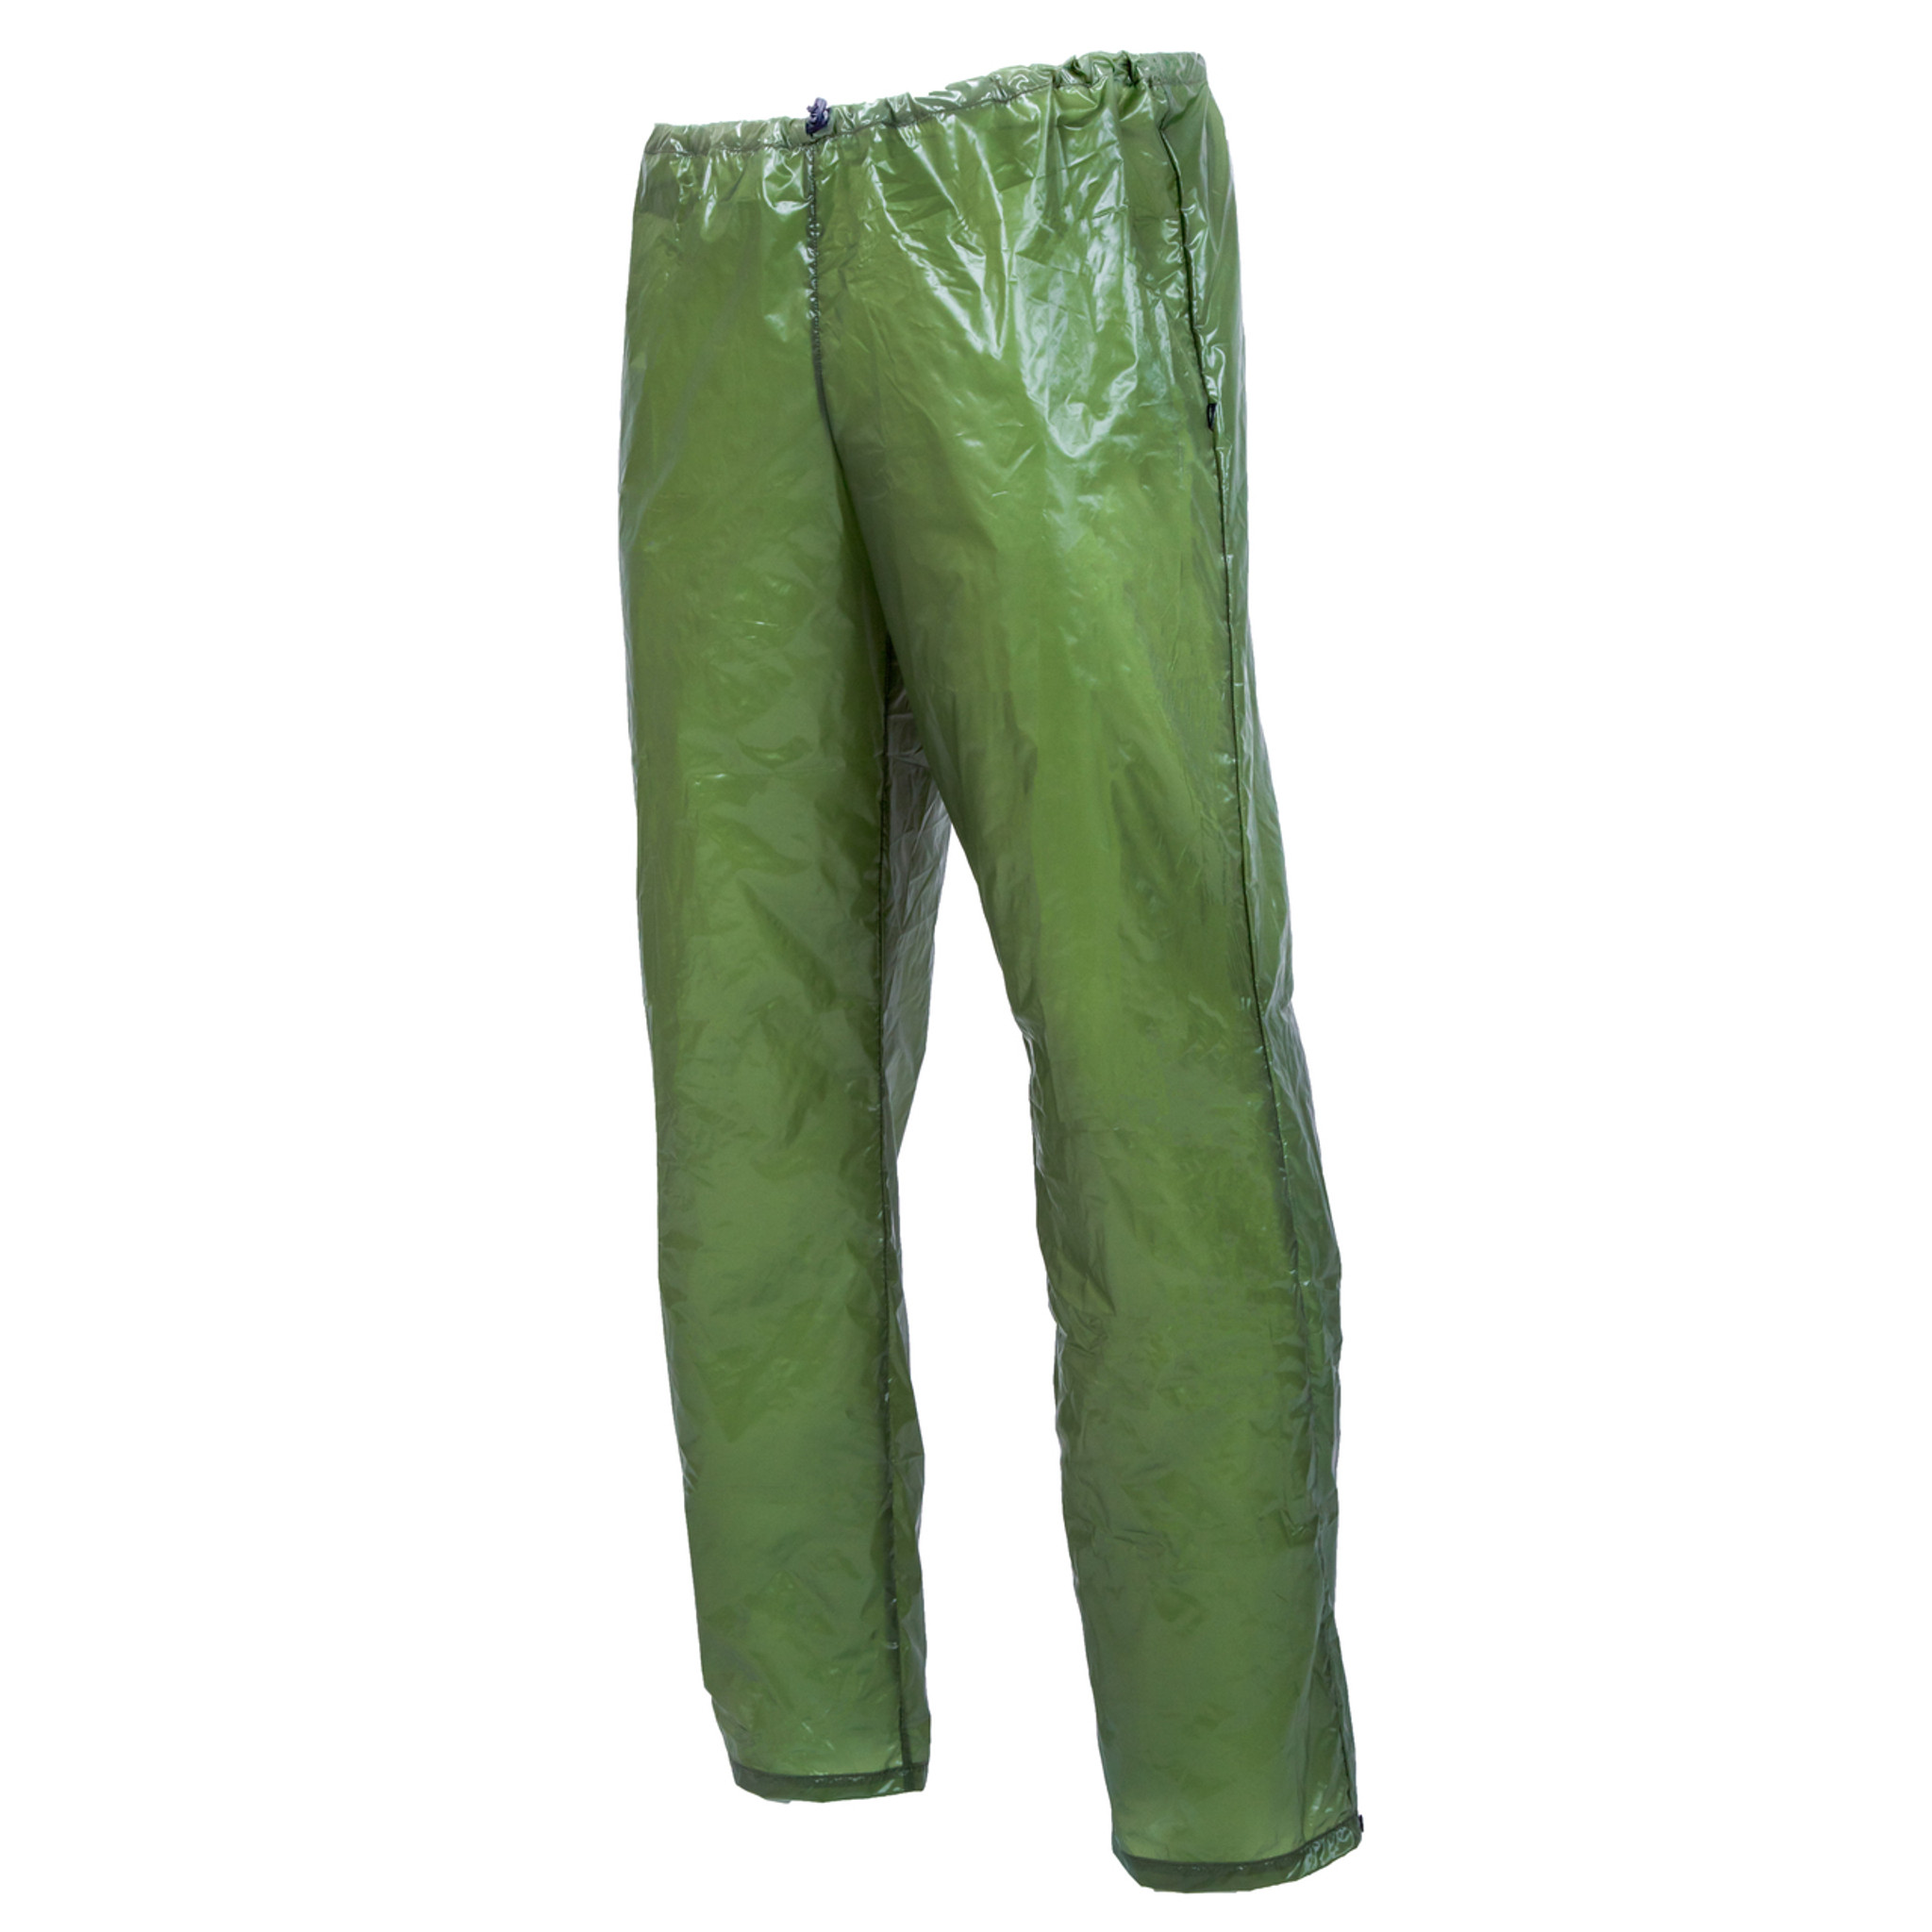 80s shell pants green | Vintage clothes online for men